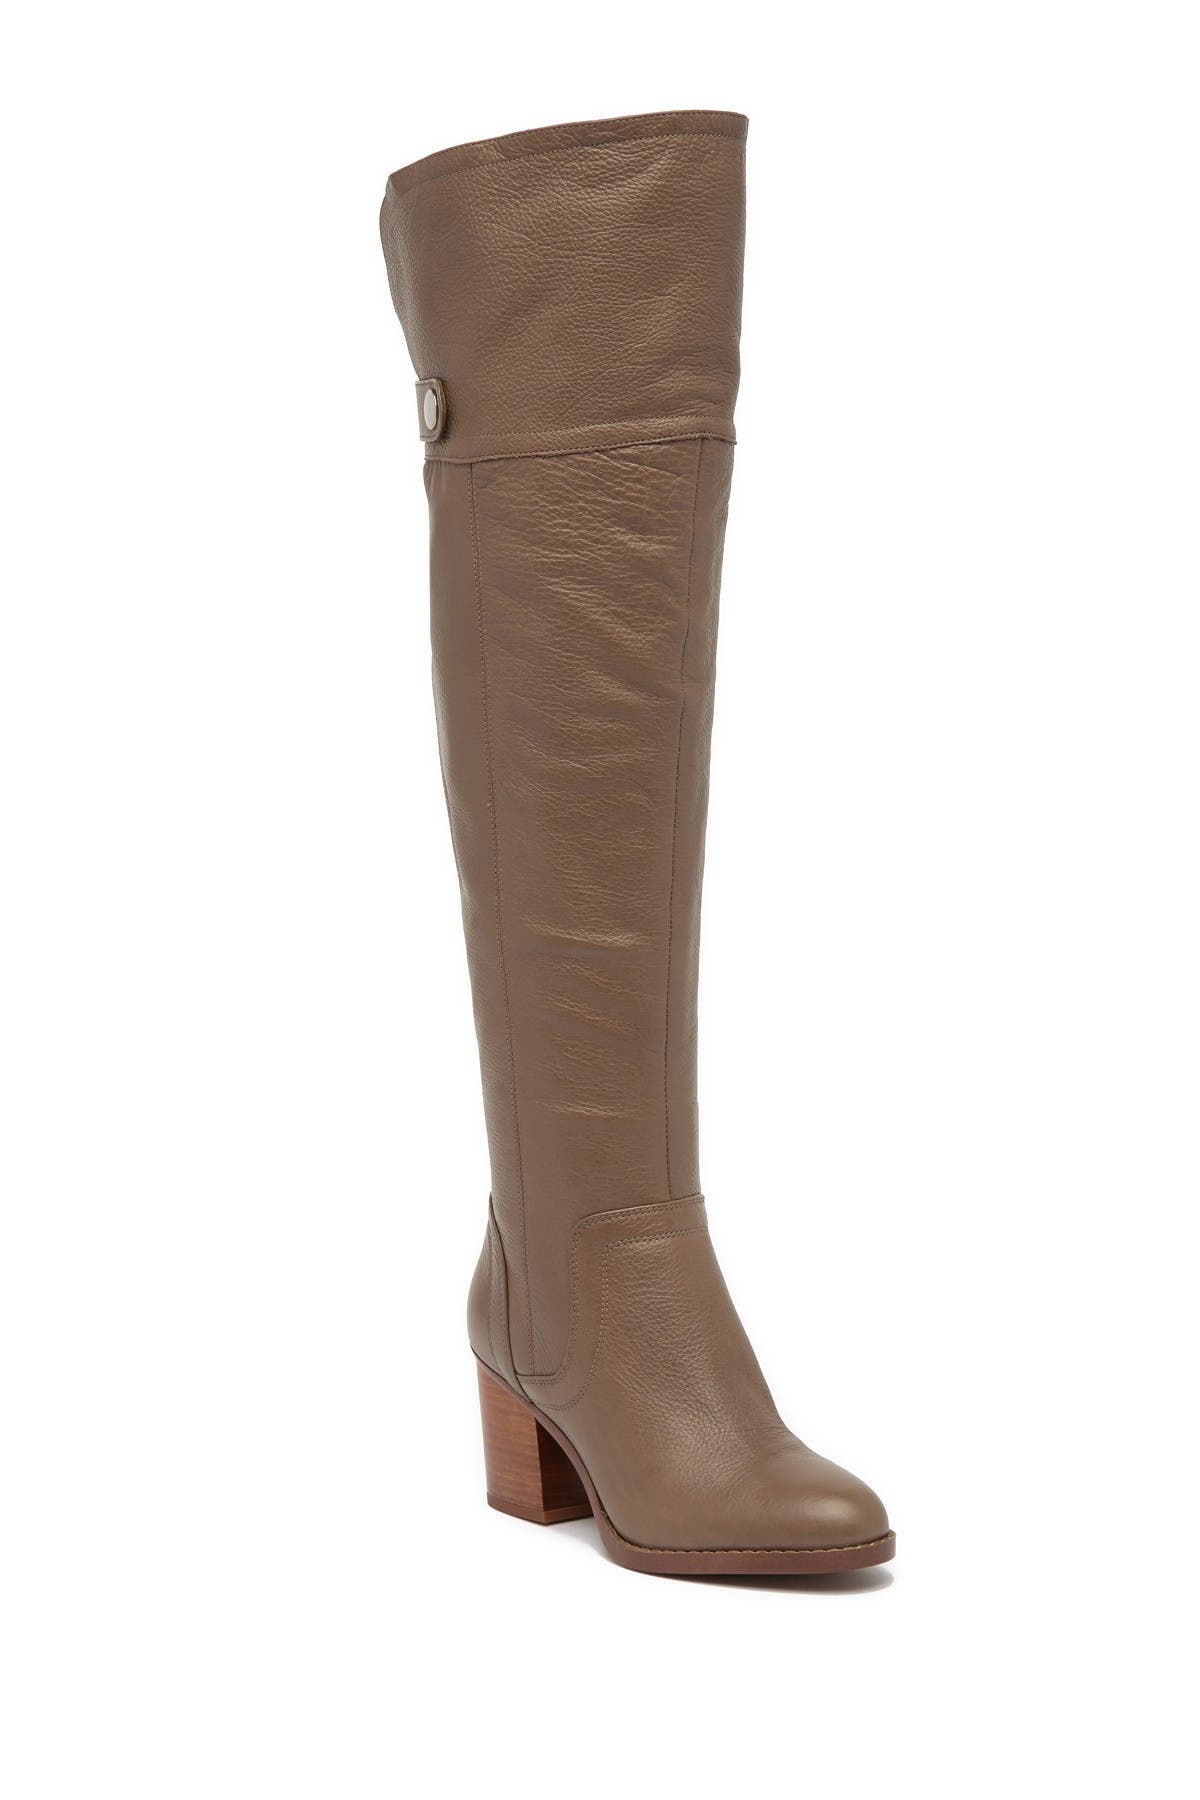 franco sarto women's ollie wide calf over the knee boot